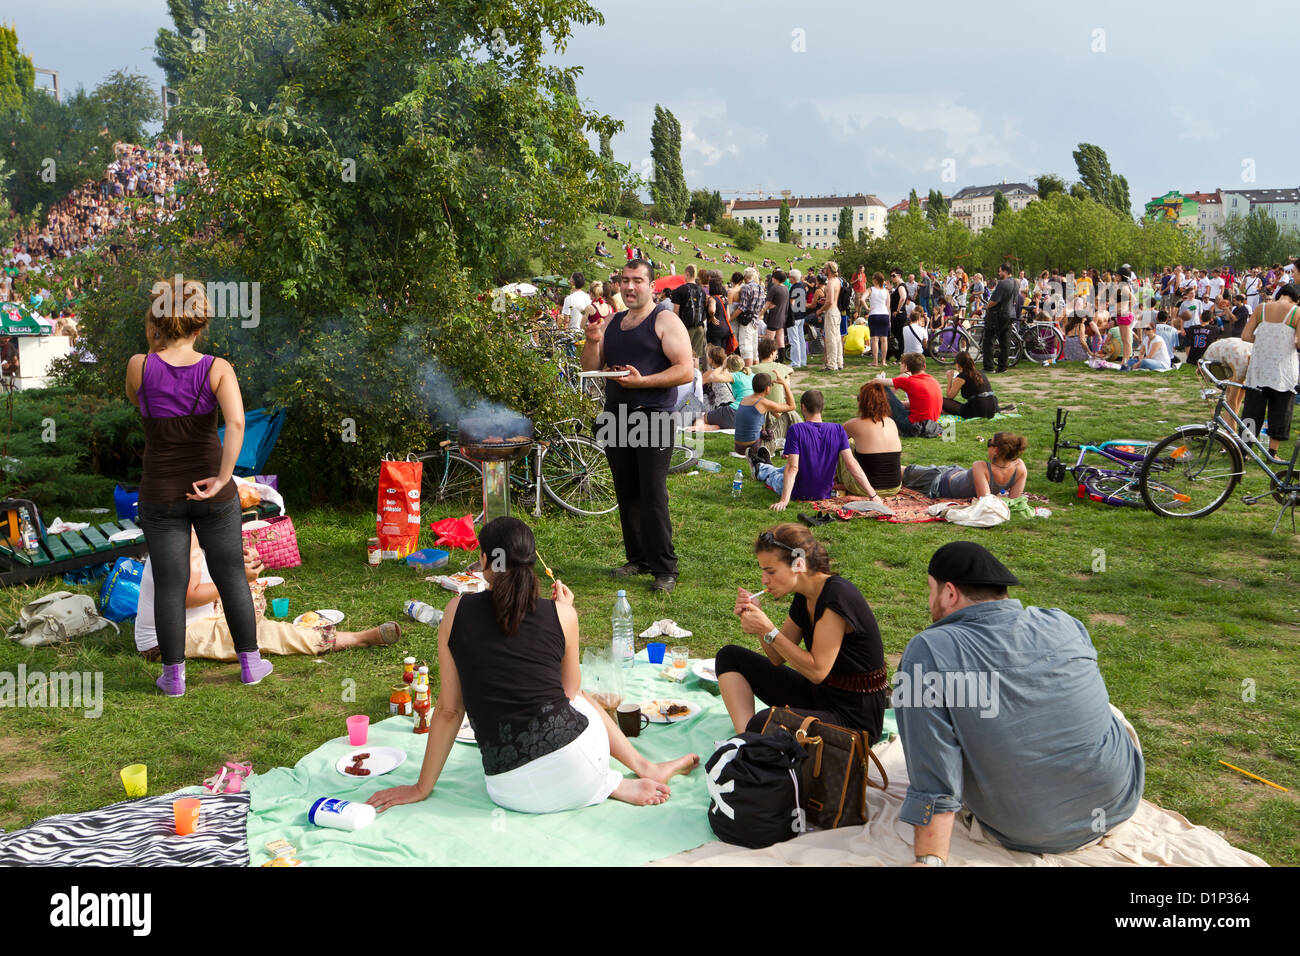 Typical Scenery on a Sunday Afternoon in the Mauerpark in Prenzlauer Berg in Berlin, Germany Stock Photo